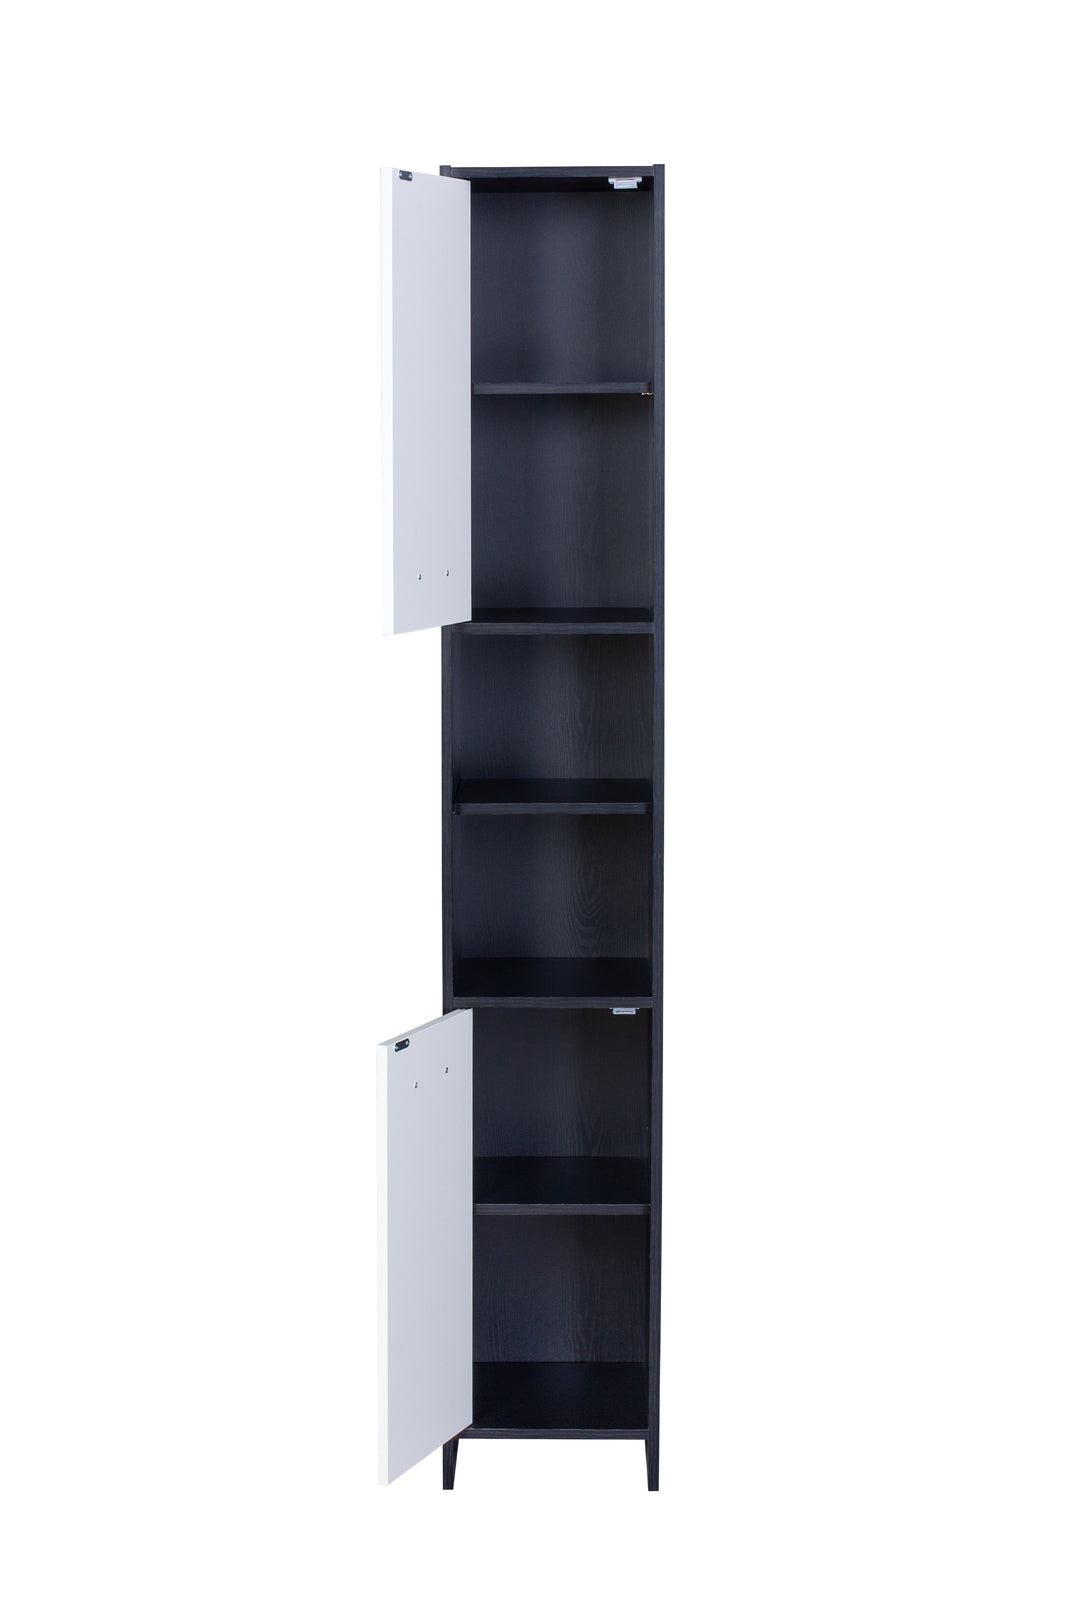 Alto Bathroom Tallboy Narrow High Cabinet With 2 Doors/2 Shleves - Black/White